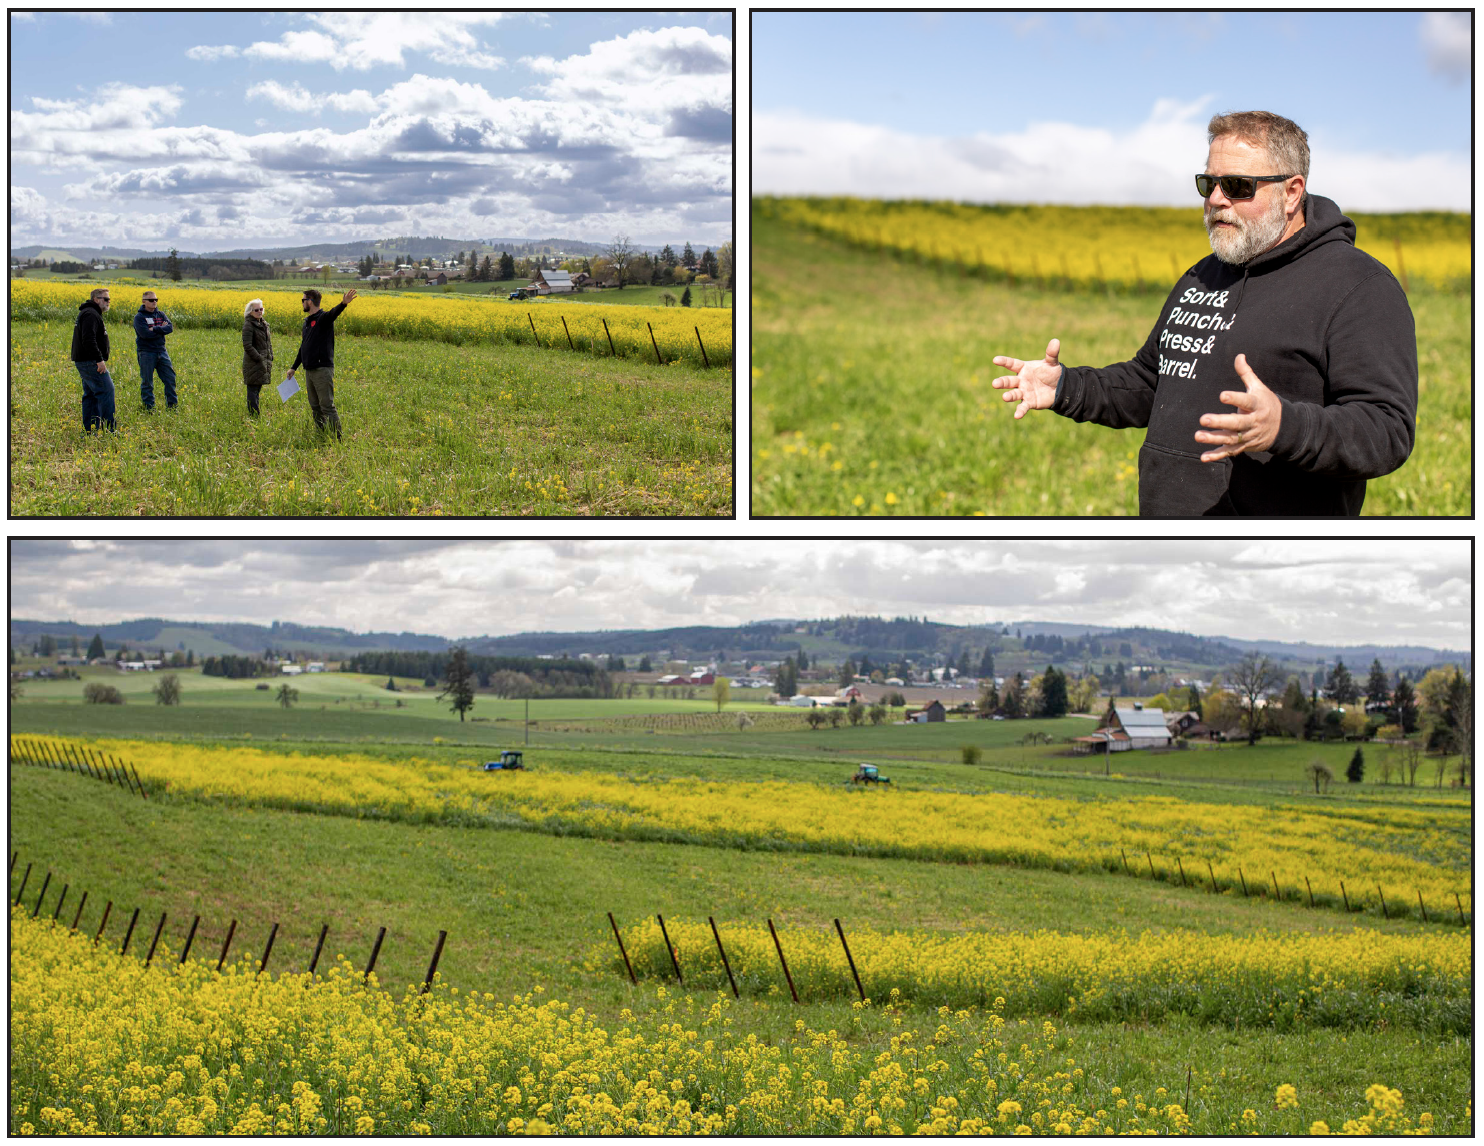 Three photos of a sweeping grassy farm with yellow mustard flowers and new trellis posts for a vineyard.